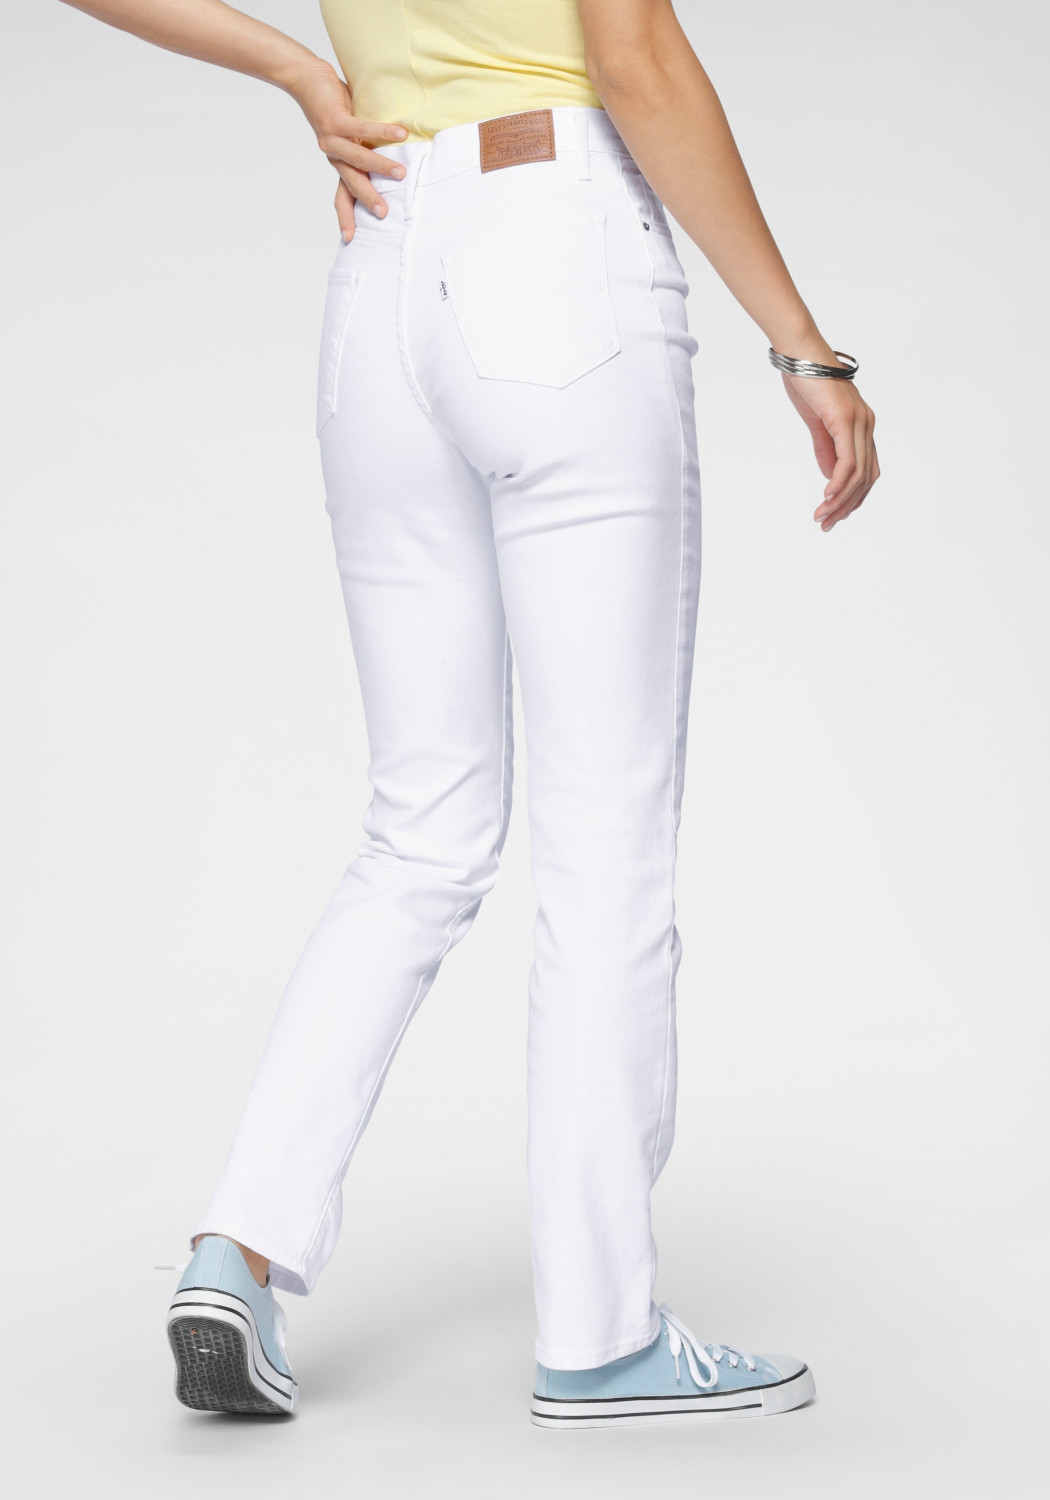 Levi's 724 High Rise Straight Jeans western white a â¬ 59,99 (oggi) | Miglior prezzo su idealo